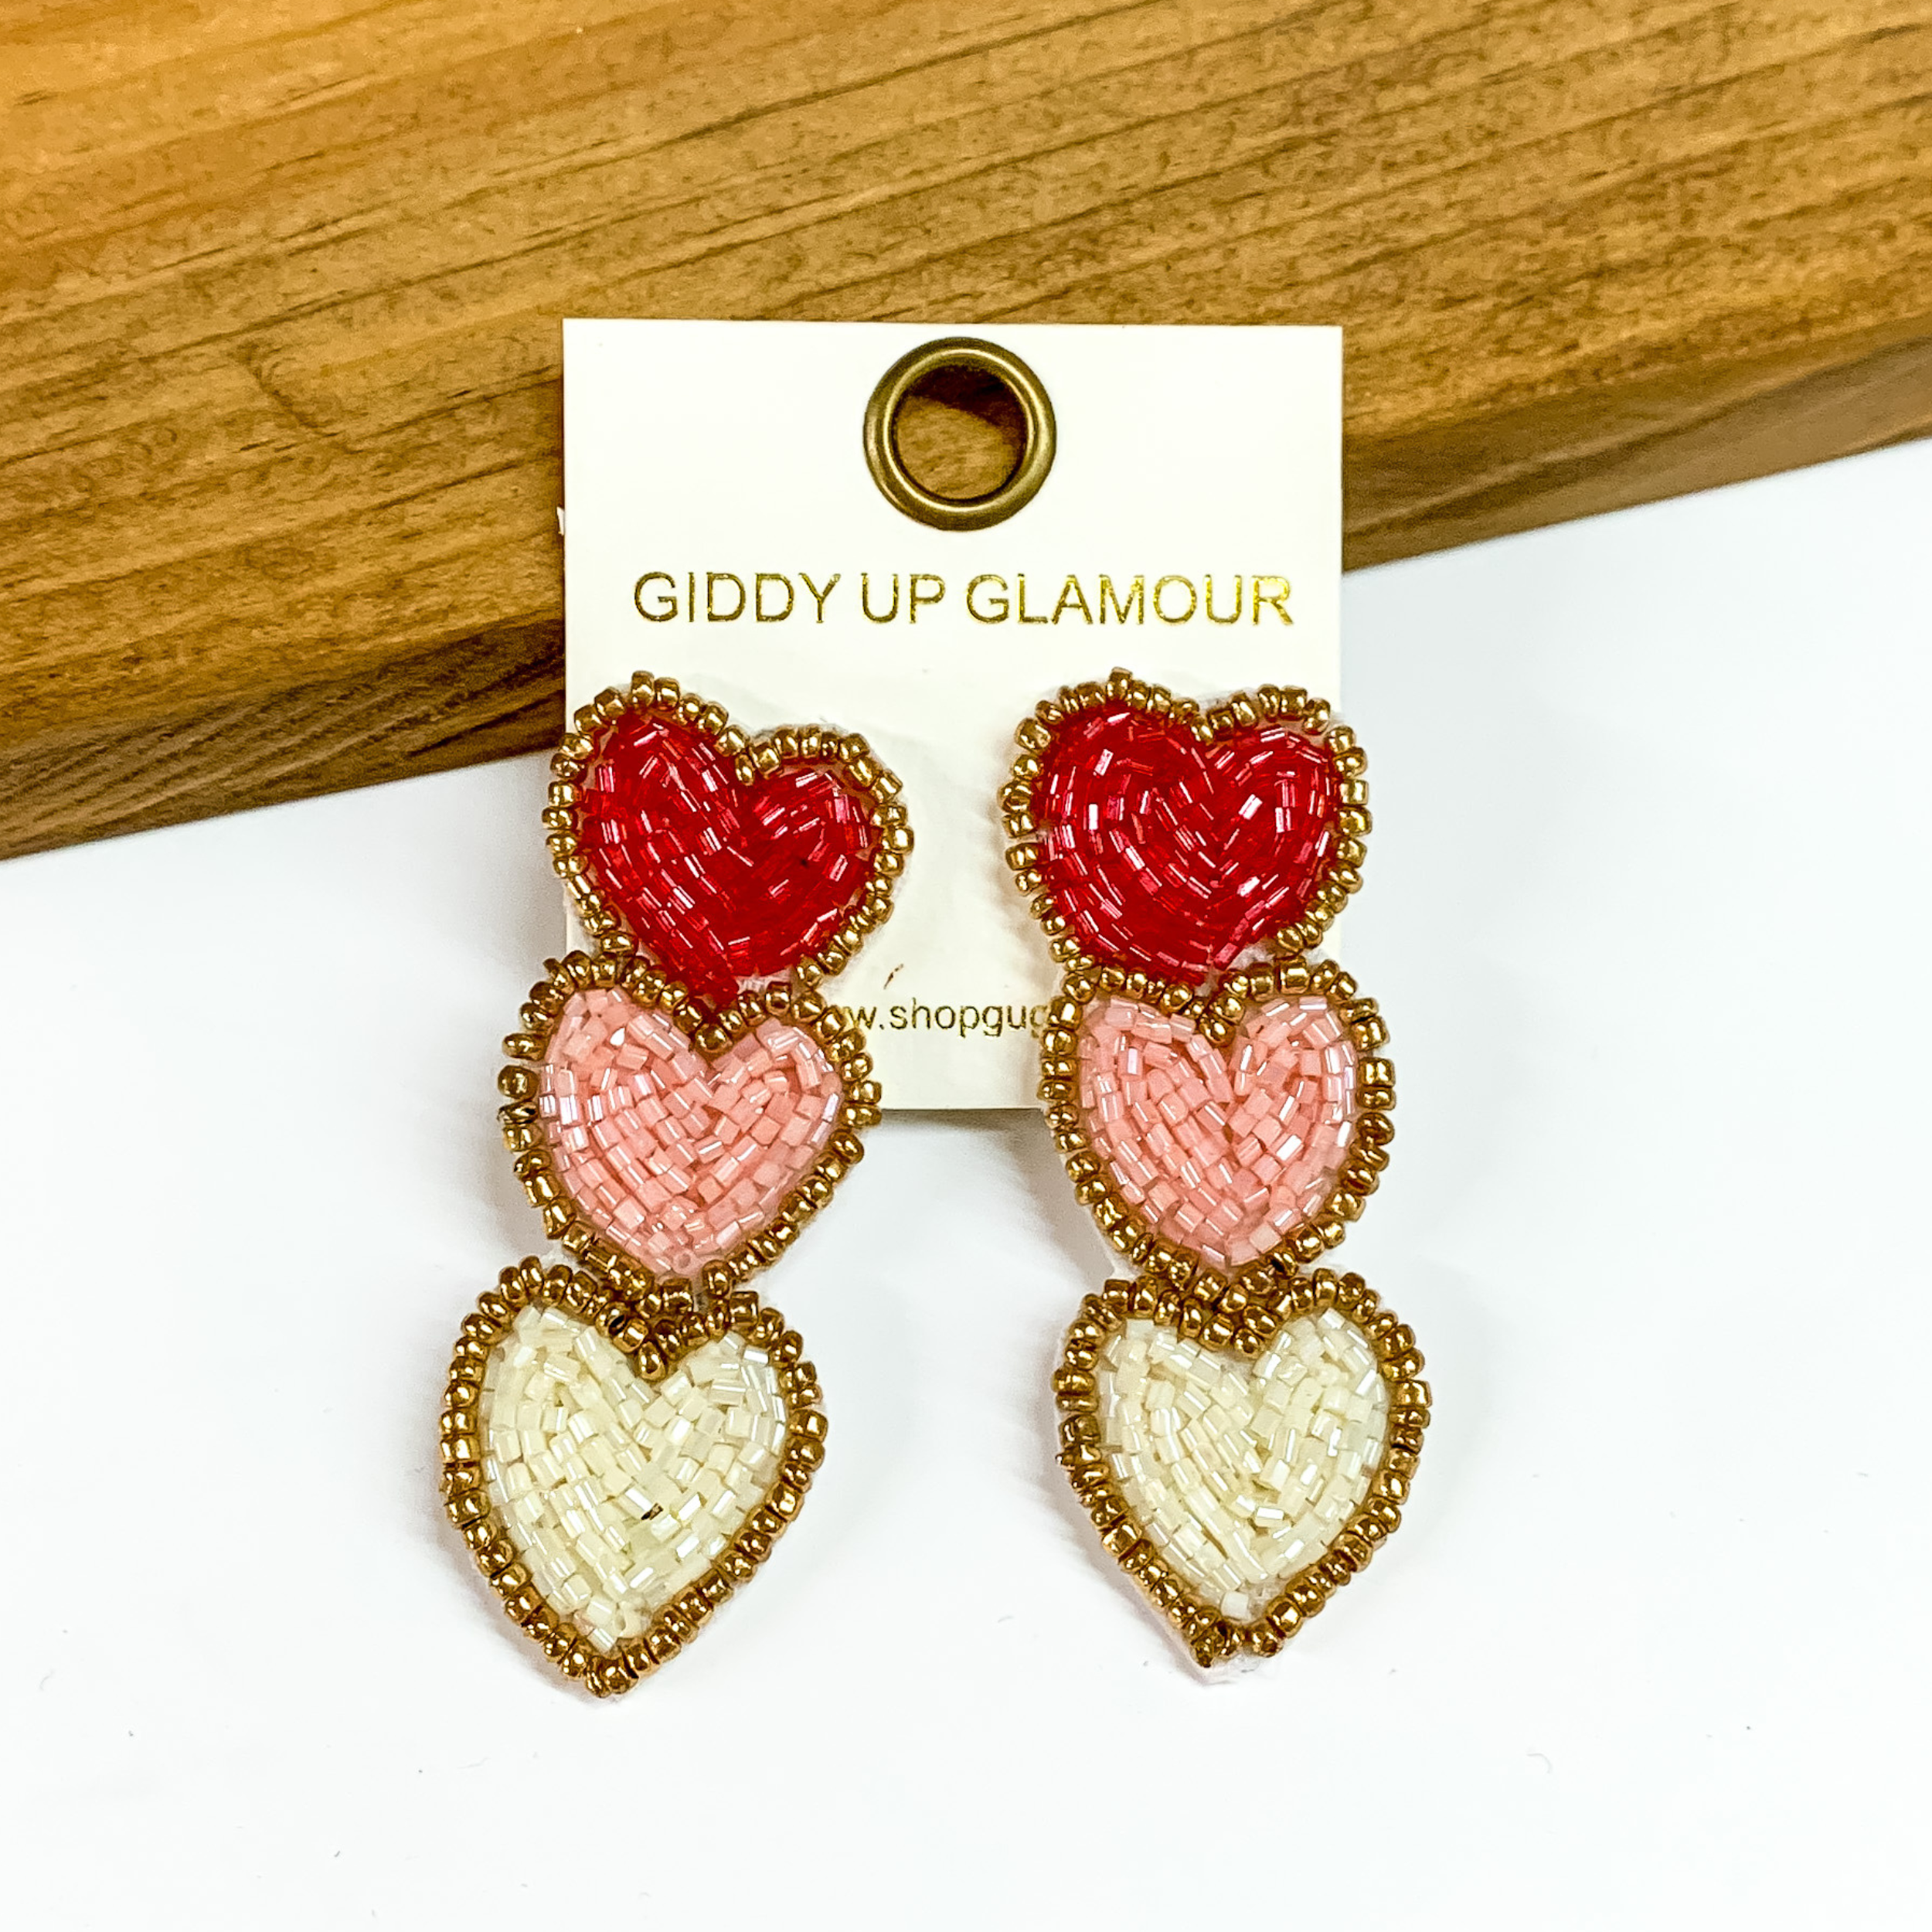 The cutest heart seedbead earrings with post backs. The earrings feature three hearts in different color. The first heart is red, the second heart is light pink and the heart on the bottom is ivory. The earrings are perfect for Valentine's Day. The earrings are placed on a white and wood background.